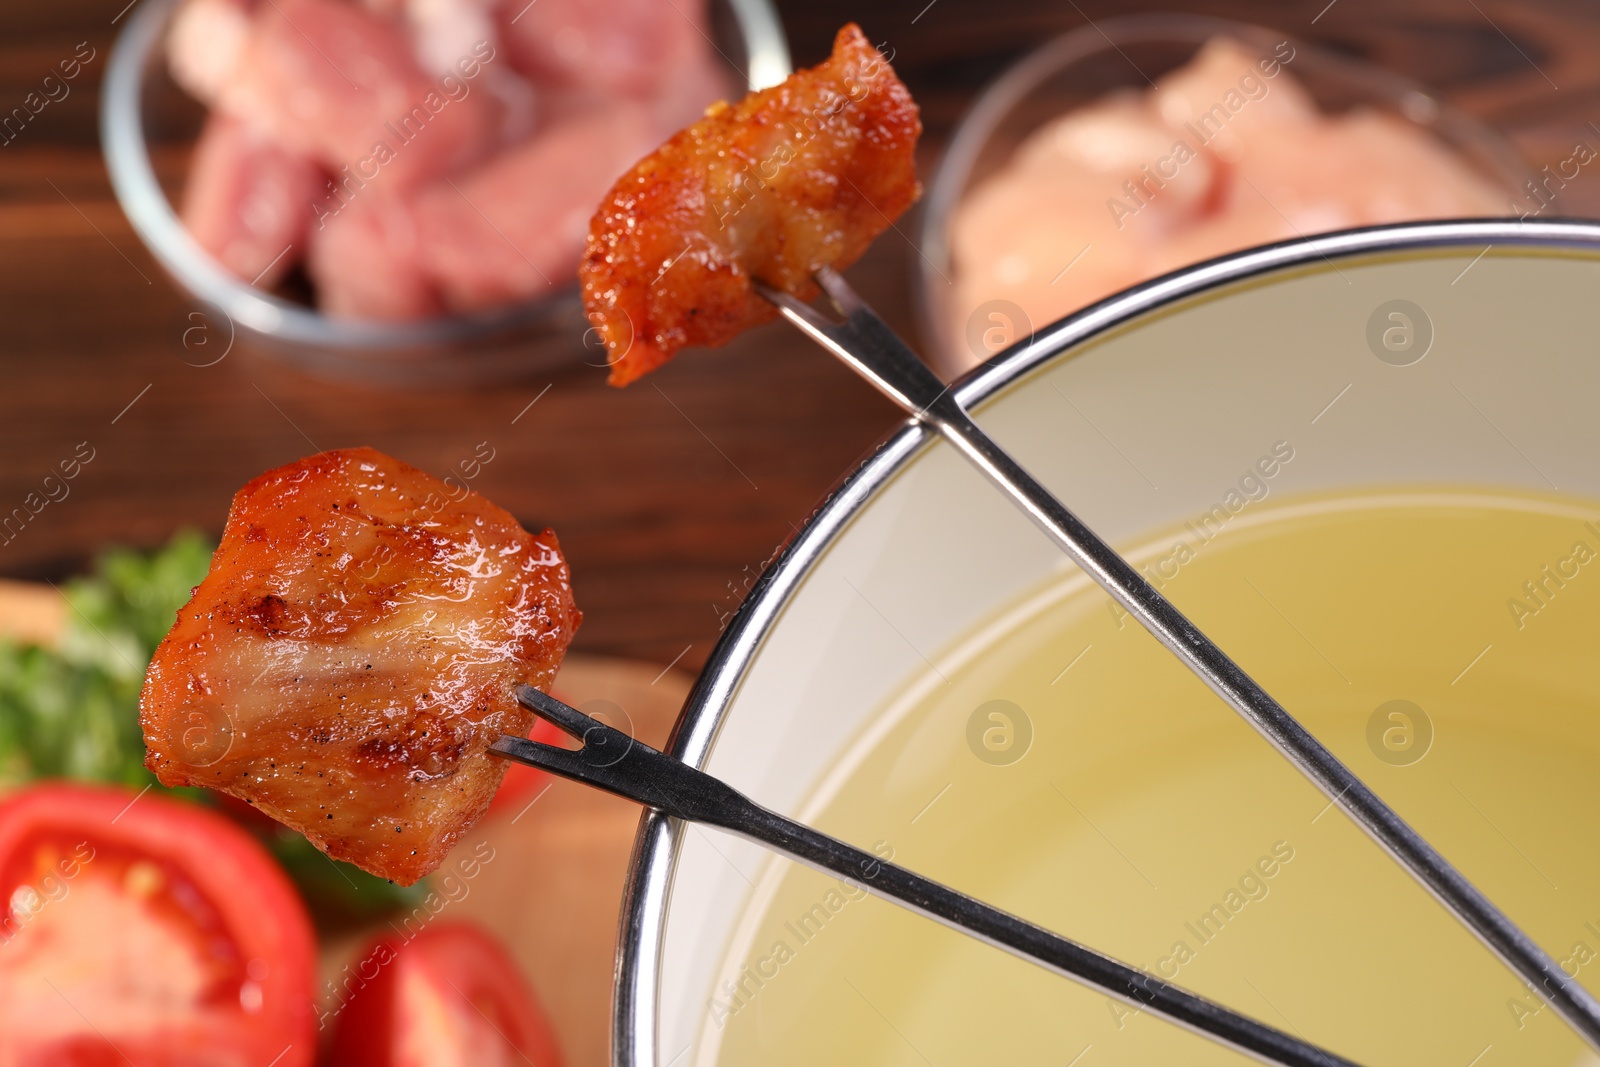 Photo of Fondue pot, forks with fried meat pieces and other products on wooden table, closeup